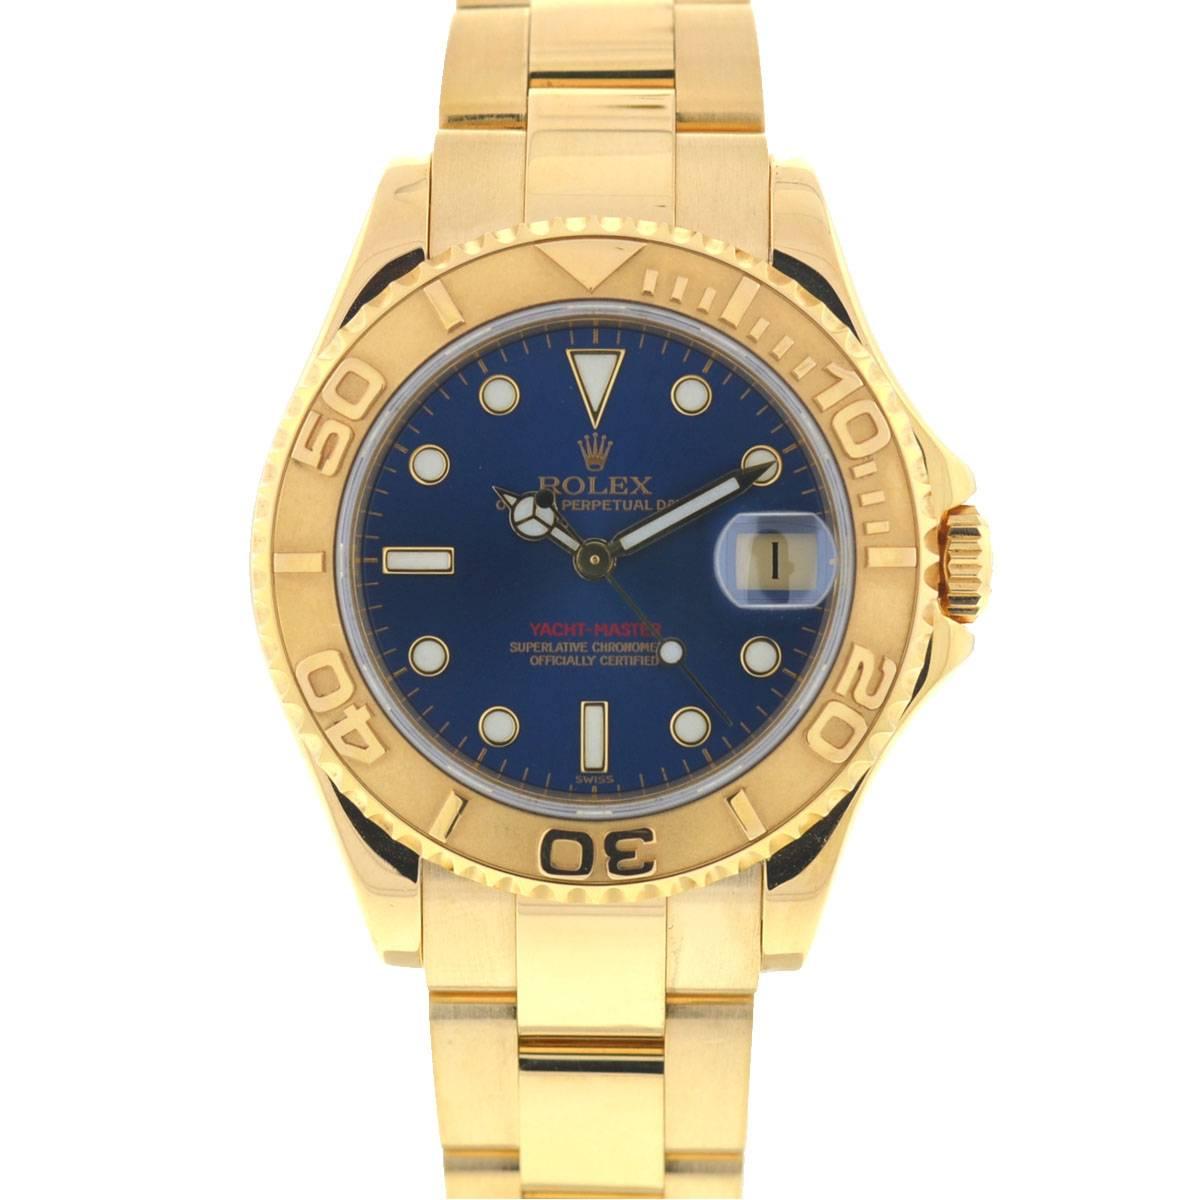 Company - Rolex
Style - Dress/Formal
Model - Yachtmaster
Reference Number - 68628 "U" Serial
Case Metal - 18k Yellow Gold
Case Measurement - 35 mm 
Bracelet - 18k Yellow Gold
Dial - Blue
Bezel - 18k Yellow Gold
Crystal - Sapphire
Movement